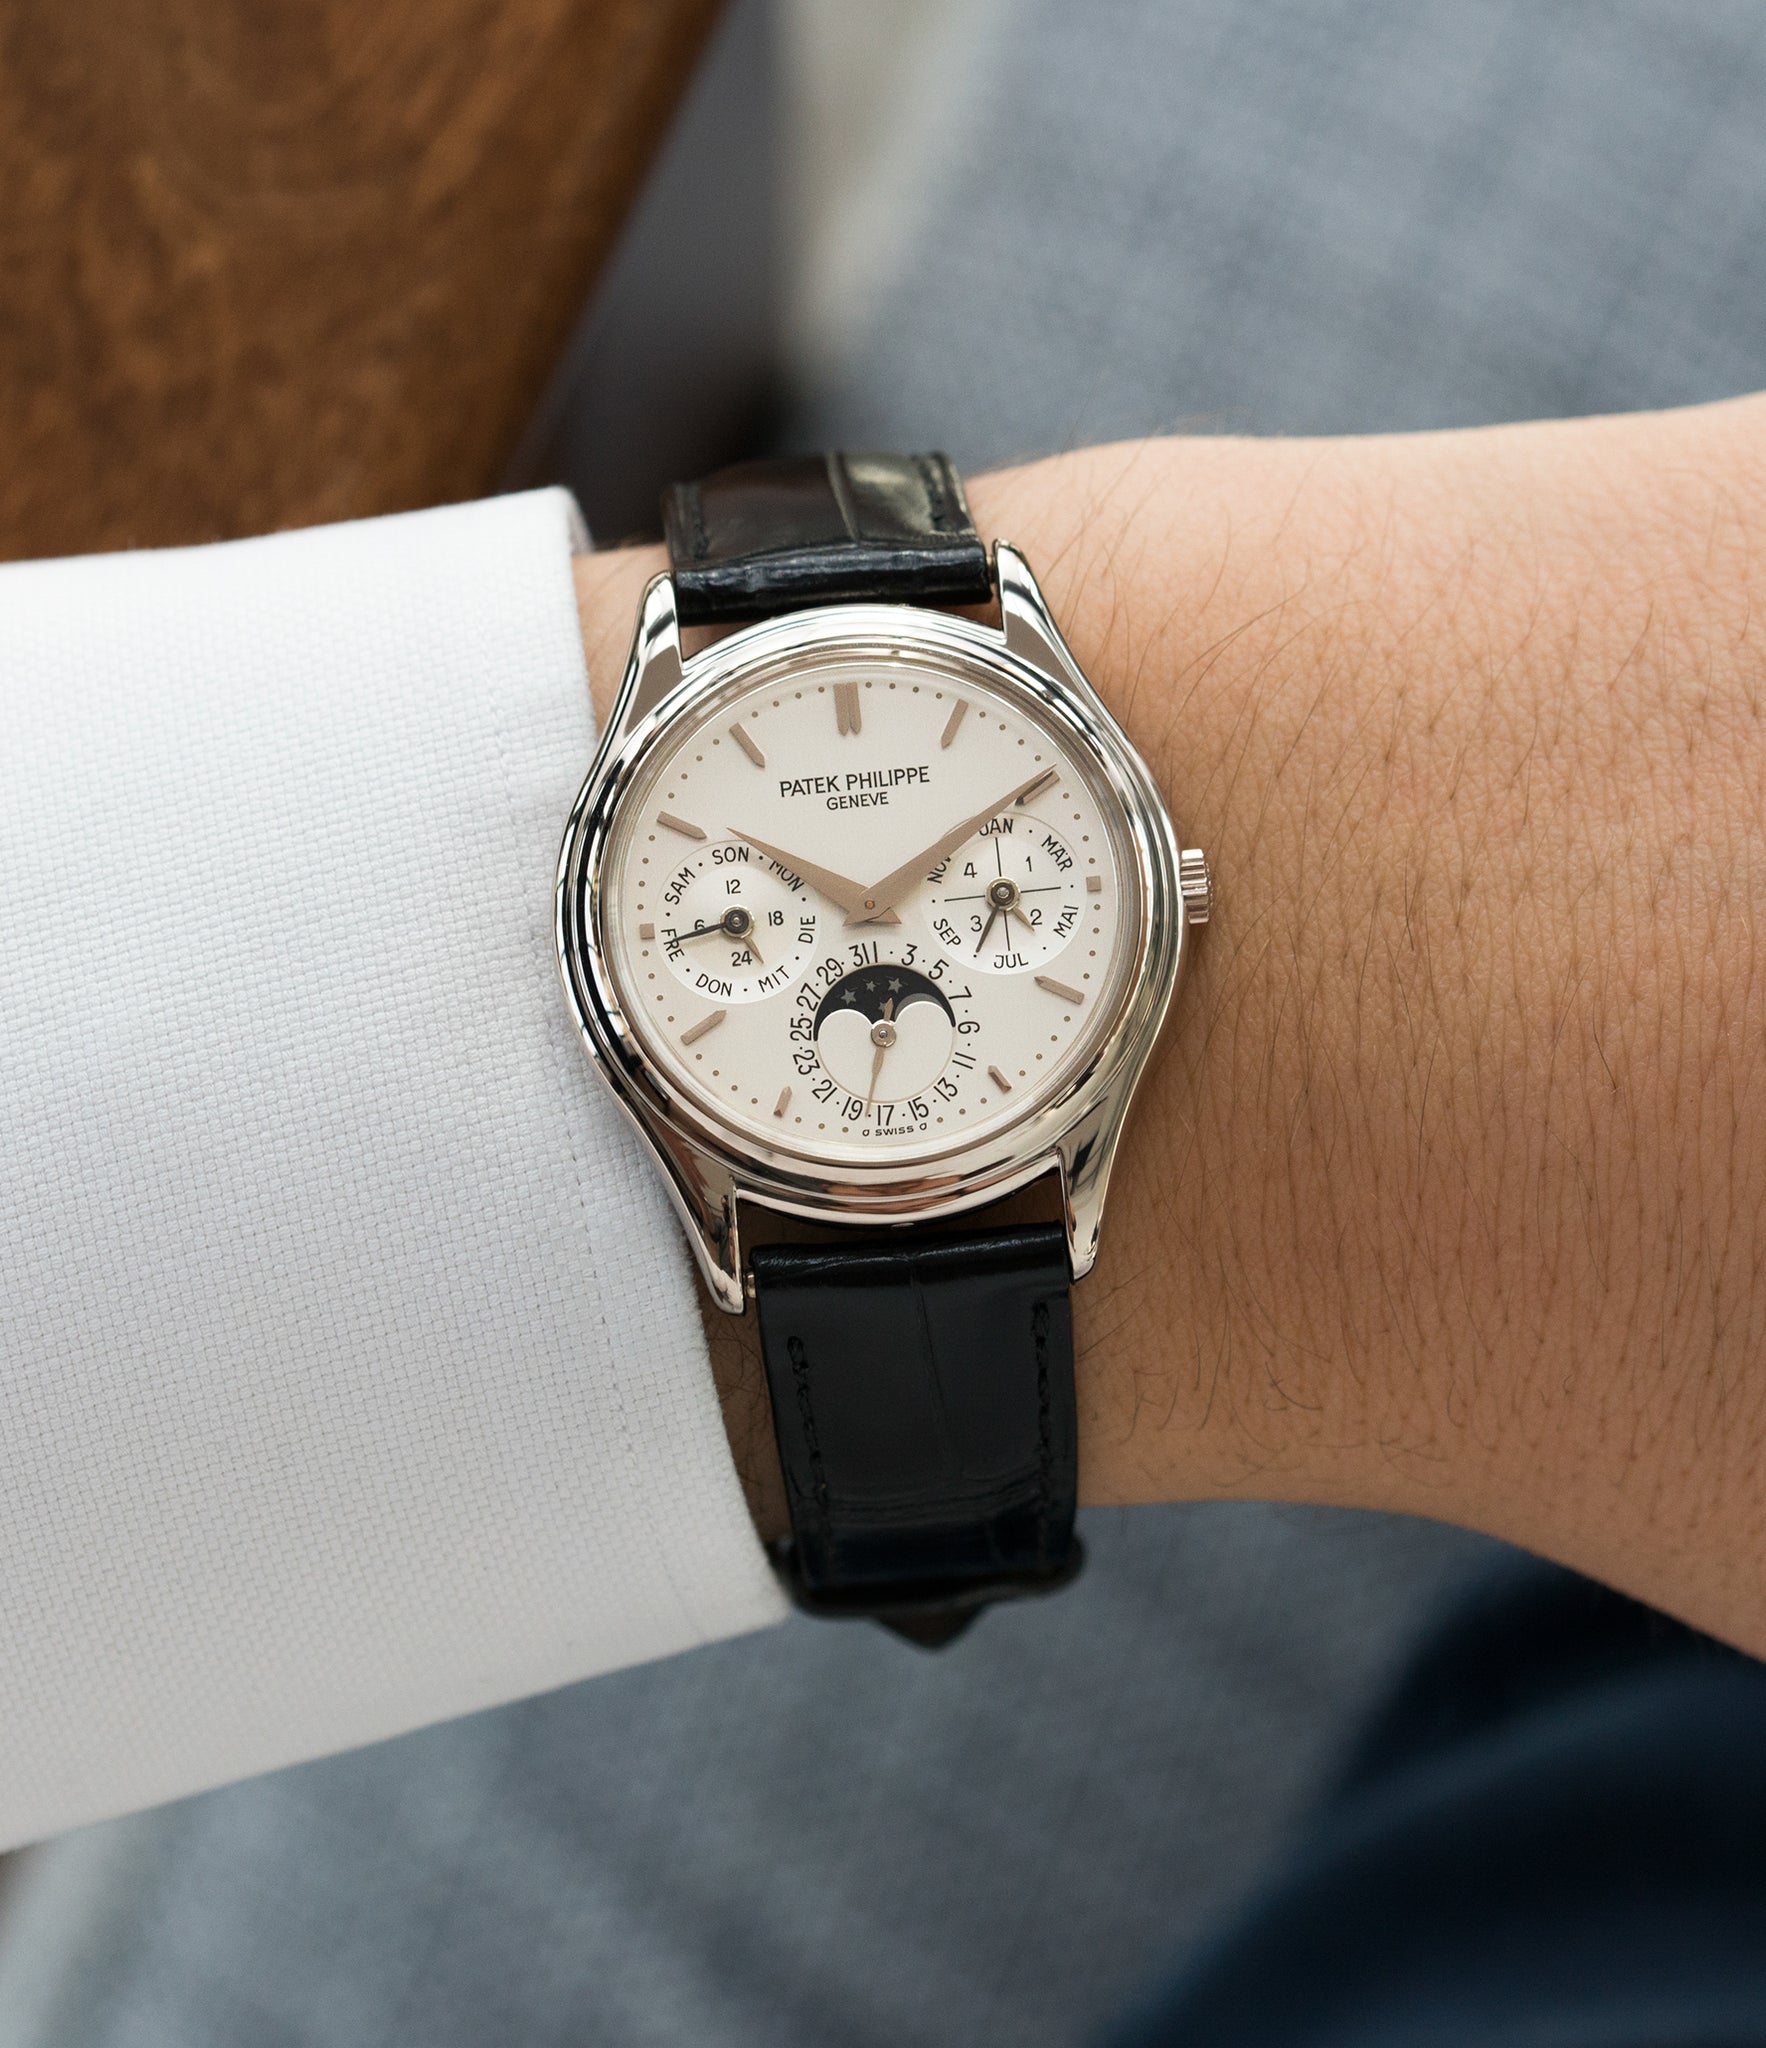 on the wrist Patek Philippe 3940G-017 Perpetual Calendar Moonphase white gold rare watch German dial full set online at A Collected Man London UK specialist rare luxury watches